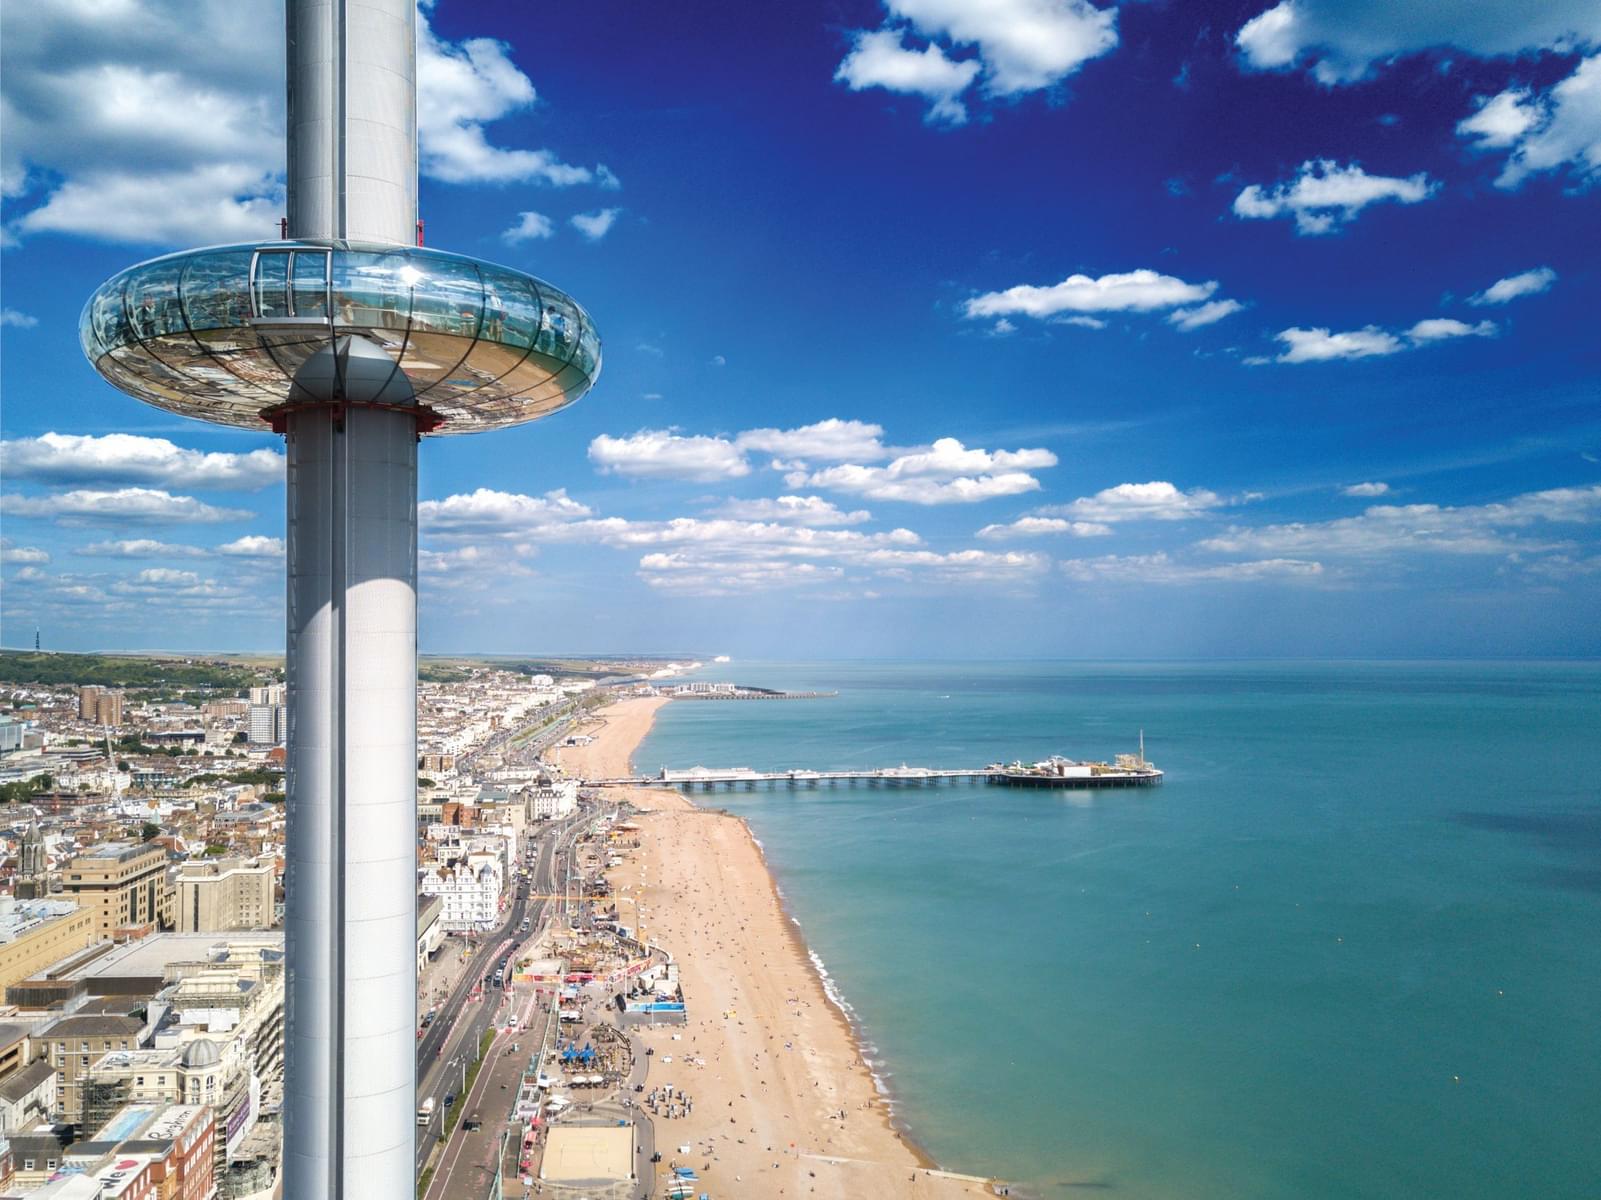 Experience breathtaking views from Brighton i360's soaring observation tower